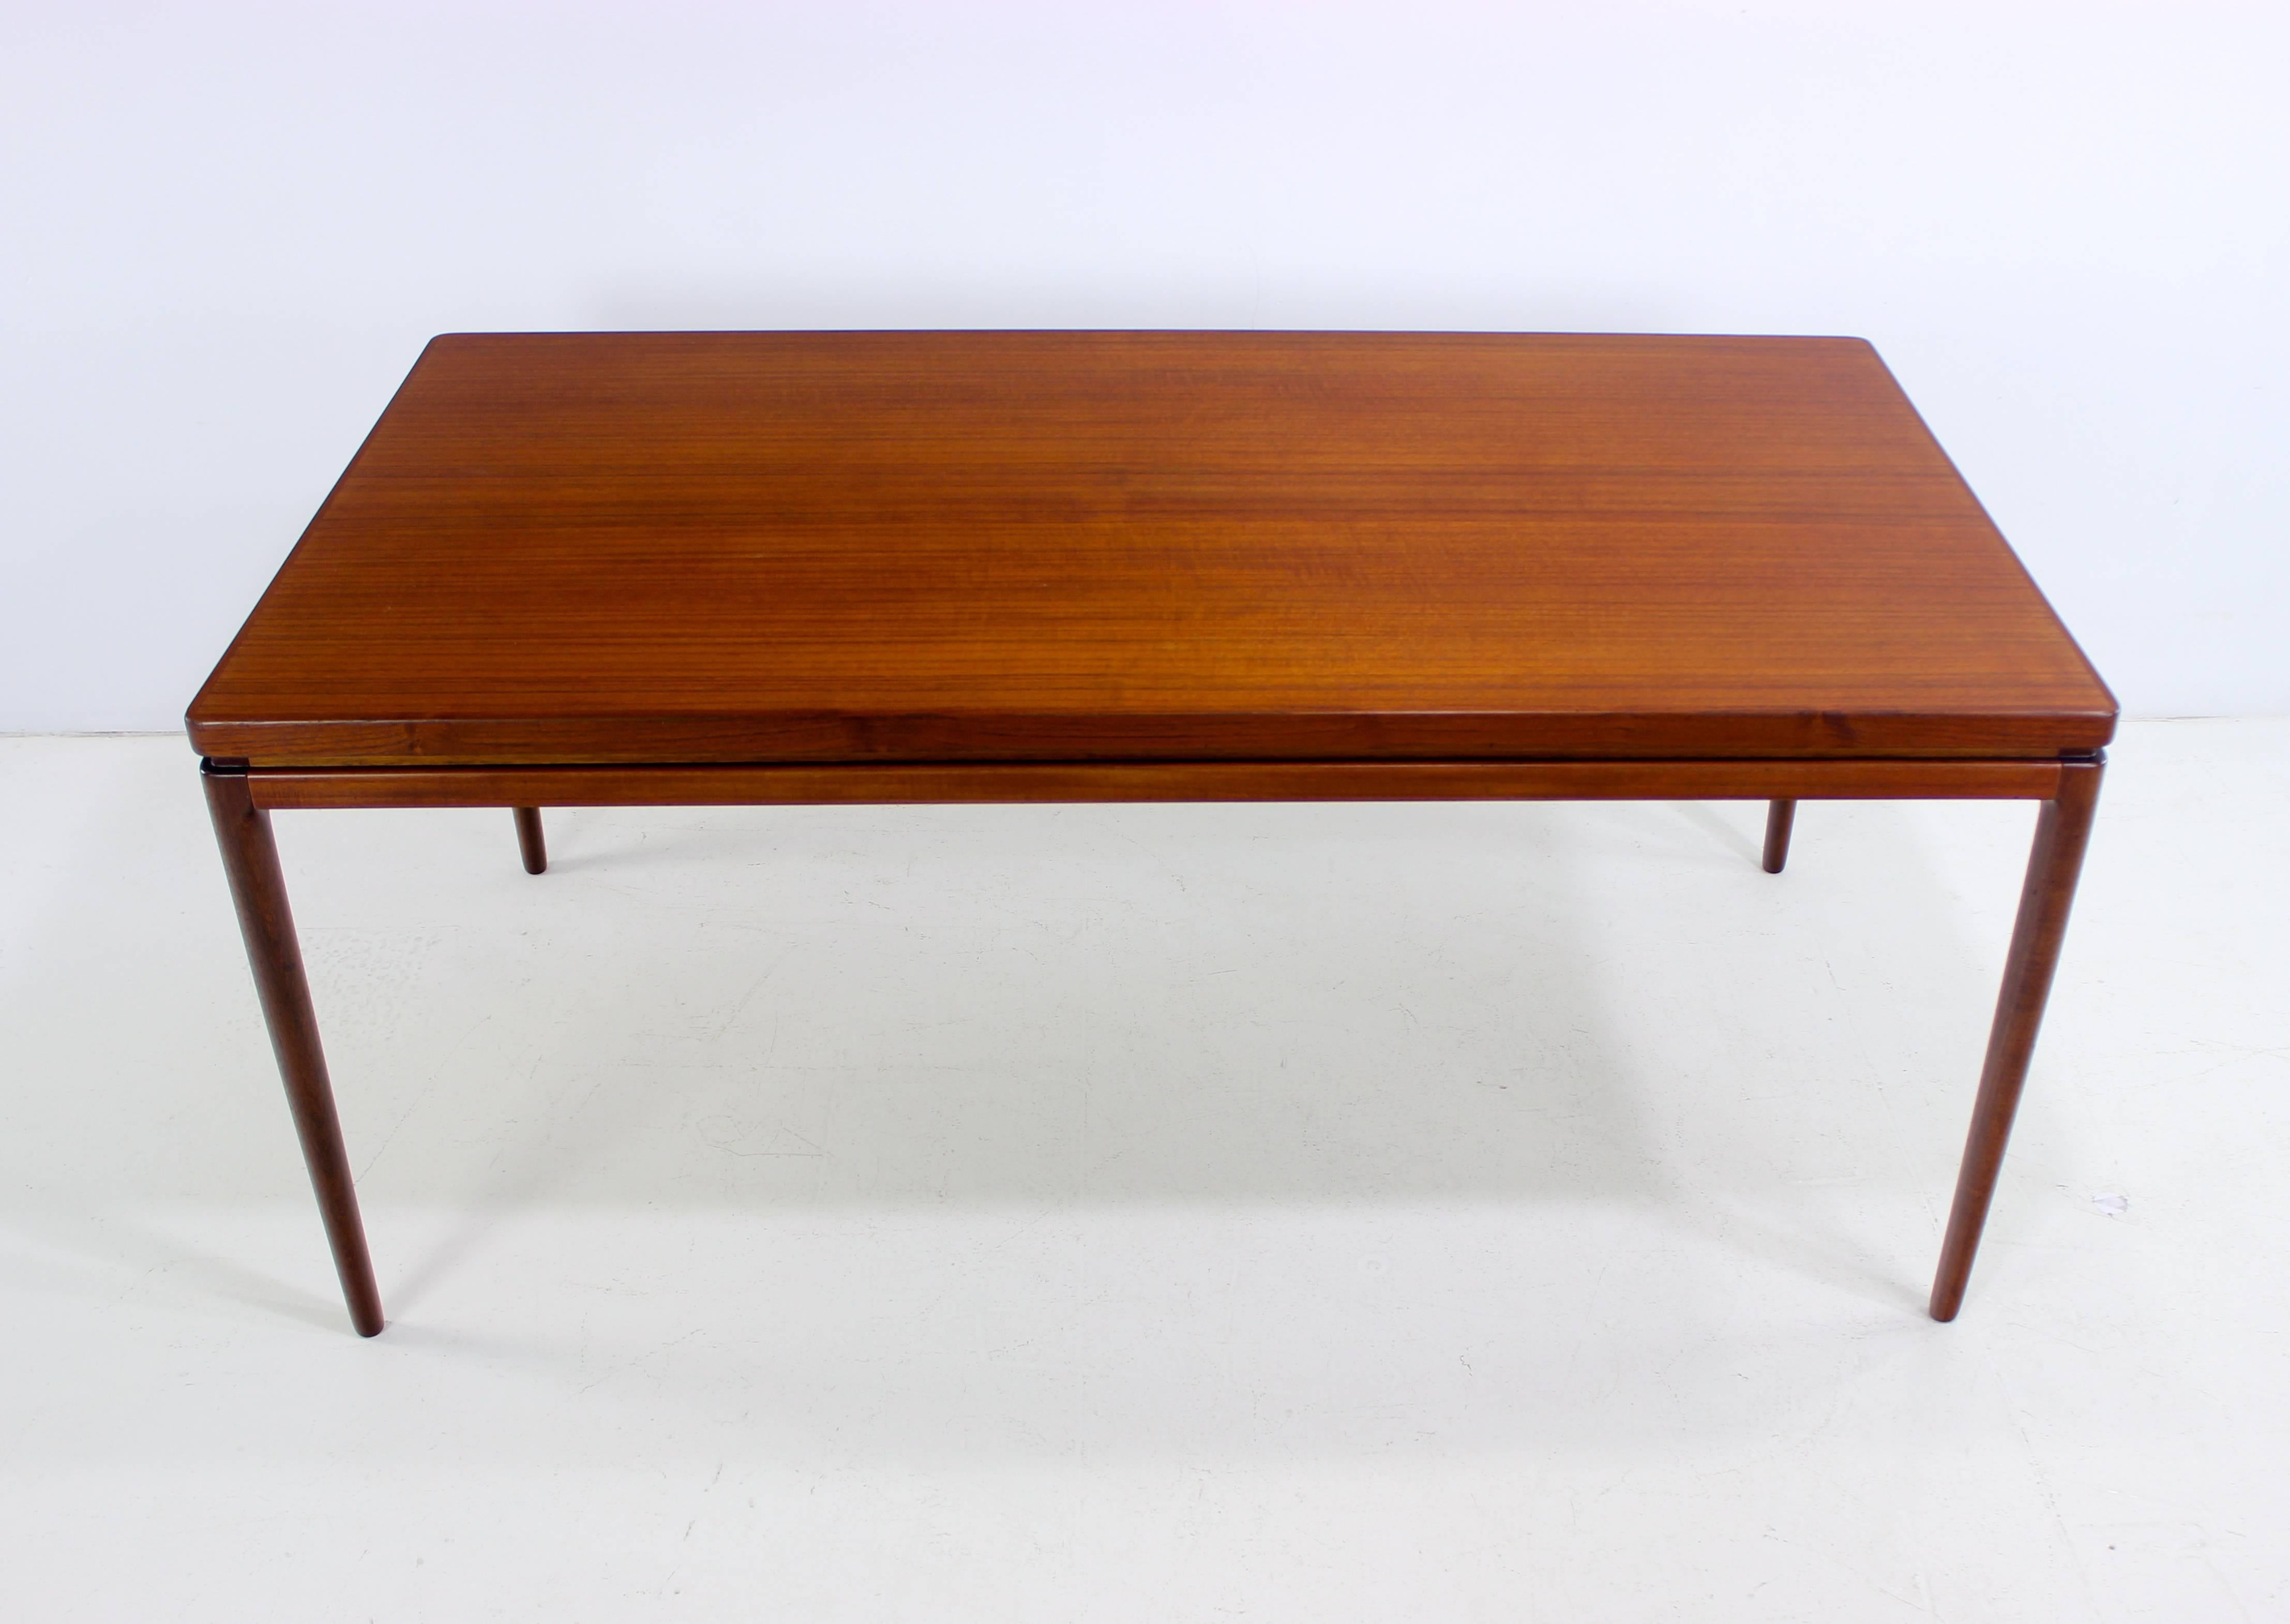 Danish Modern Teak Draw-Leaf Dining Table Designed by Johannes Andersen In Excellent Condition For Sale In Portland, OR